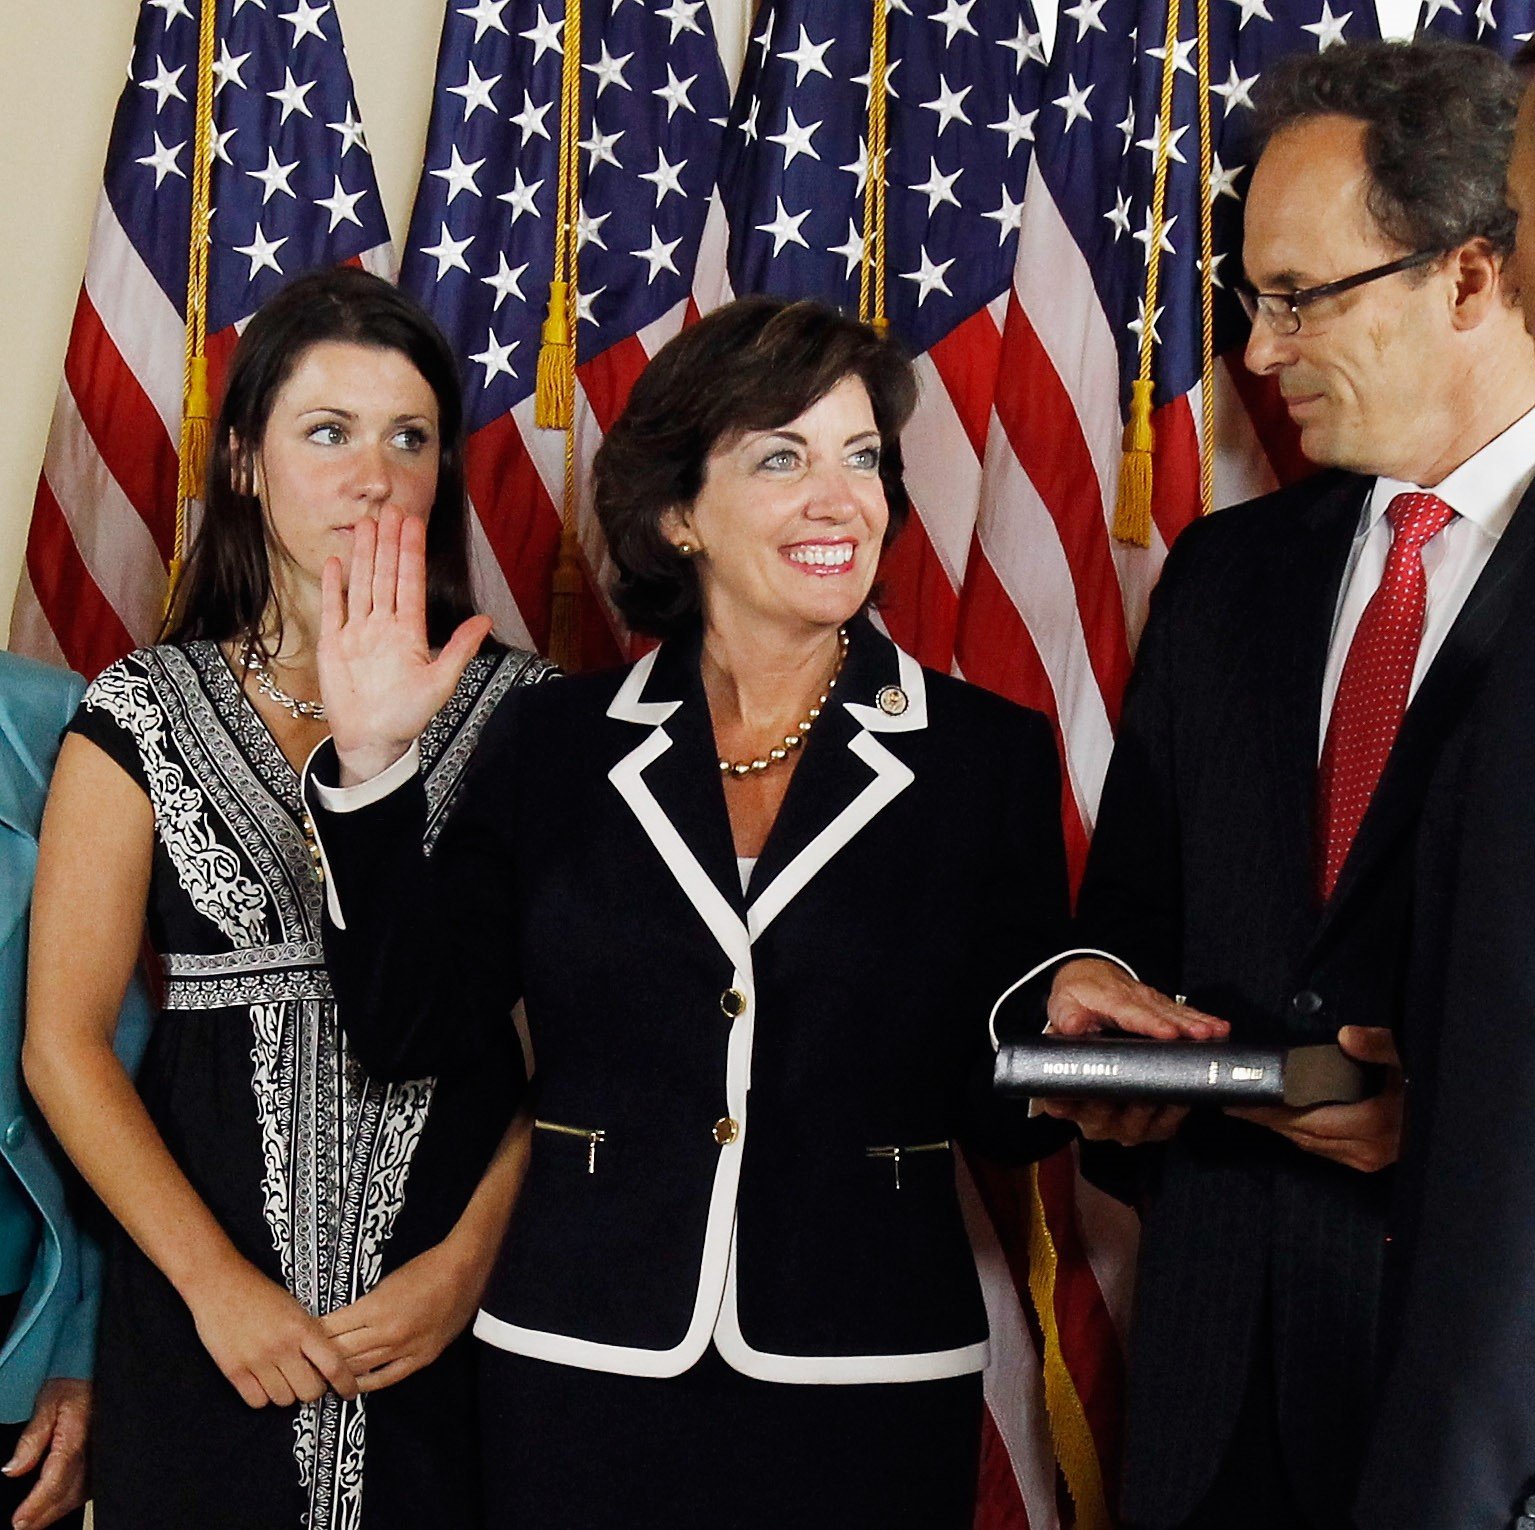 Kathy Hochul with her daughter Katie Hochul and husband Bill Hochul during mock swearing-in